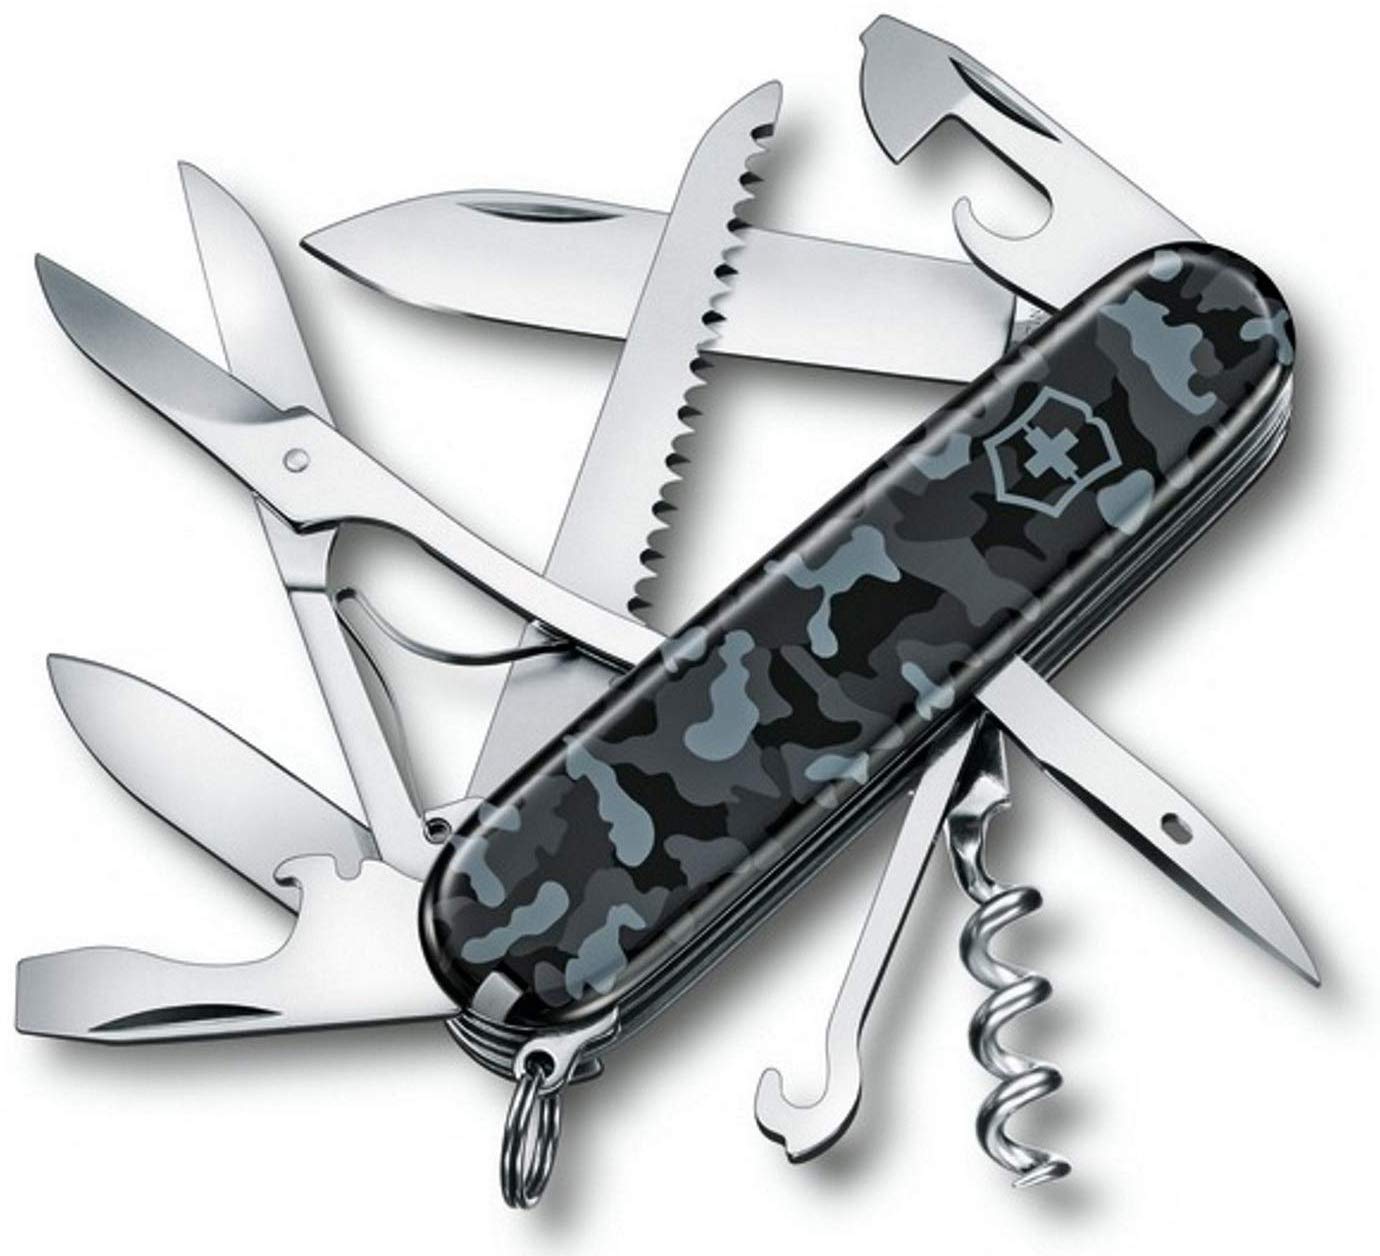 Indian Army soldiers and officers to soon carry desi version of Swiss Army knives – Indian Defence Research Wing